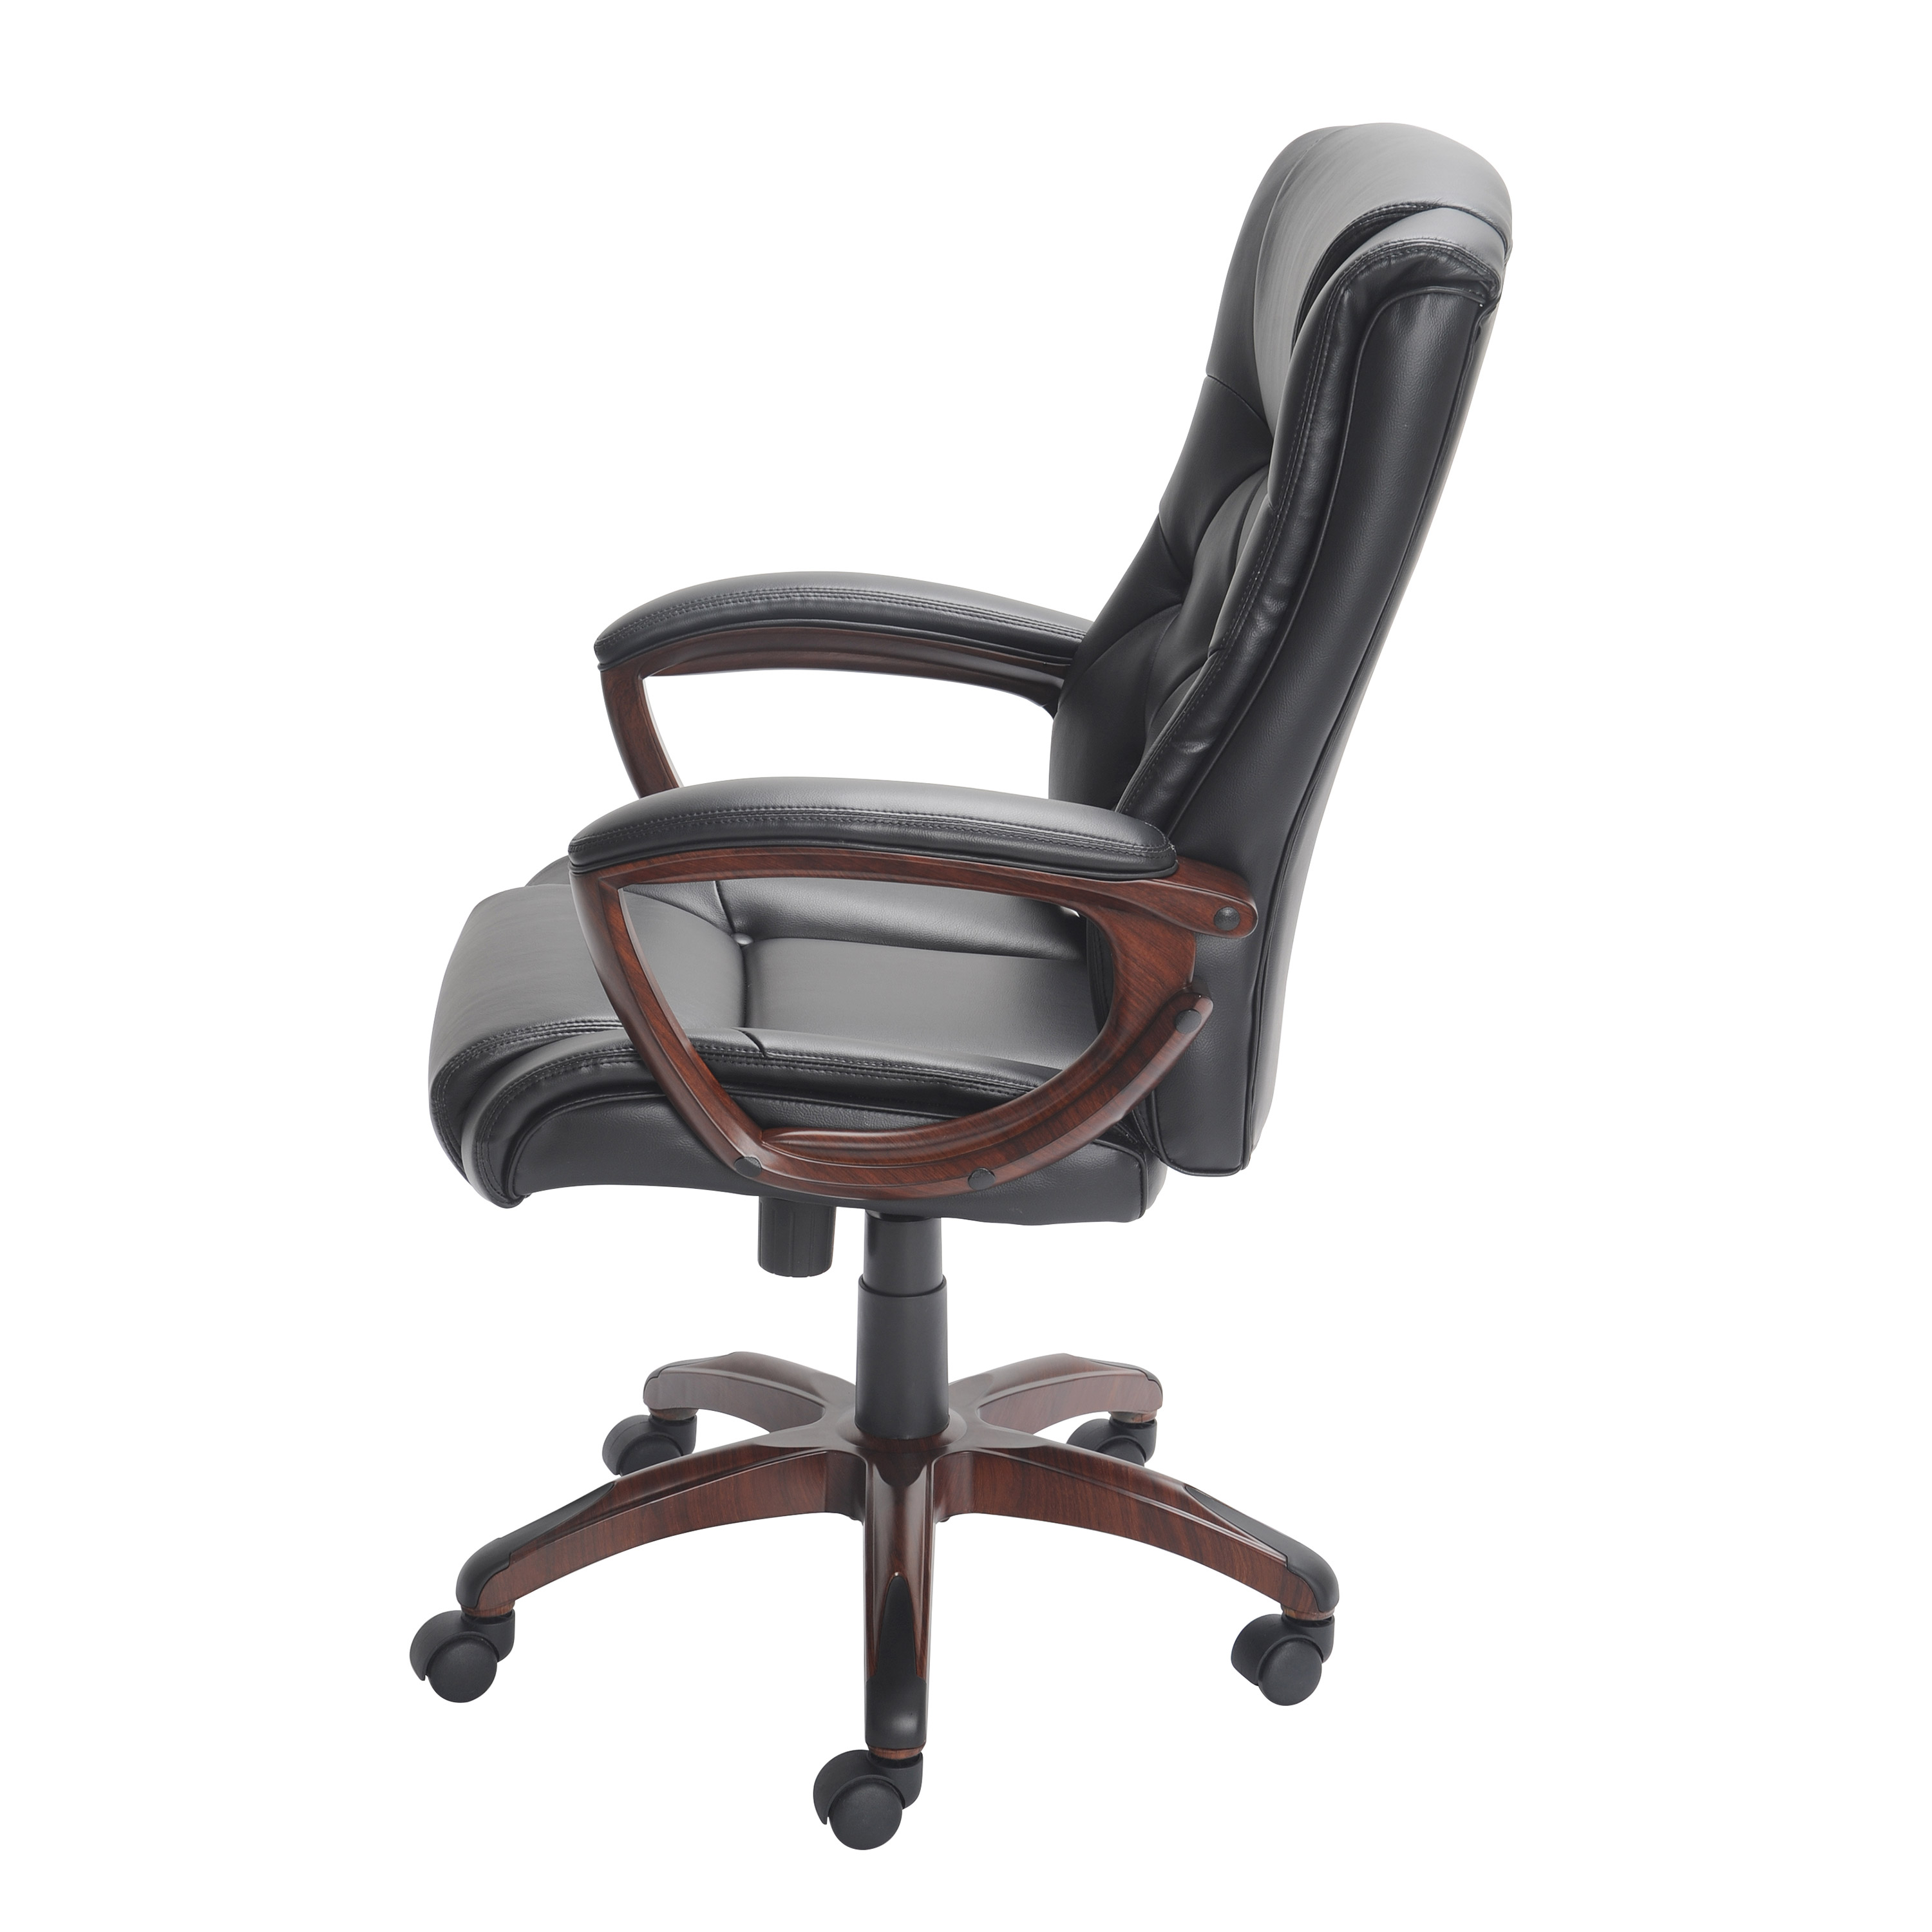 Better Homes and Gardens Executive, Mid-Back Manager's Office Chair with Arms, Black Bonded Leather - image 4 of 9